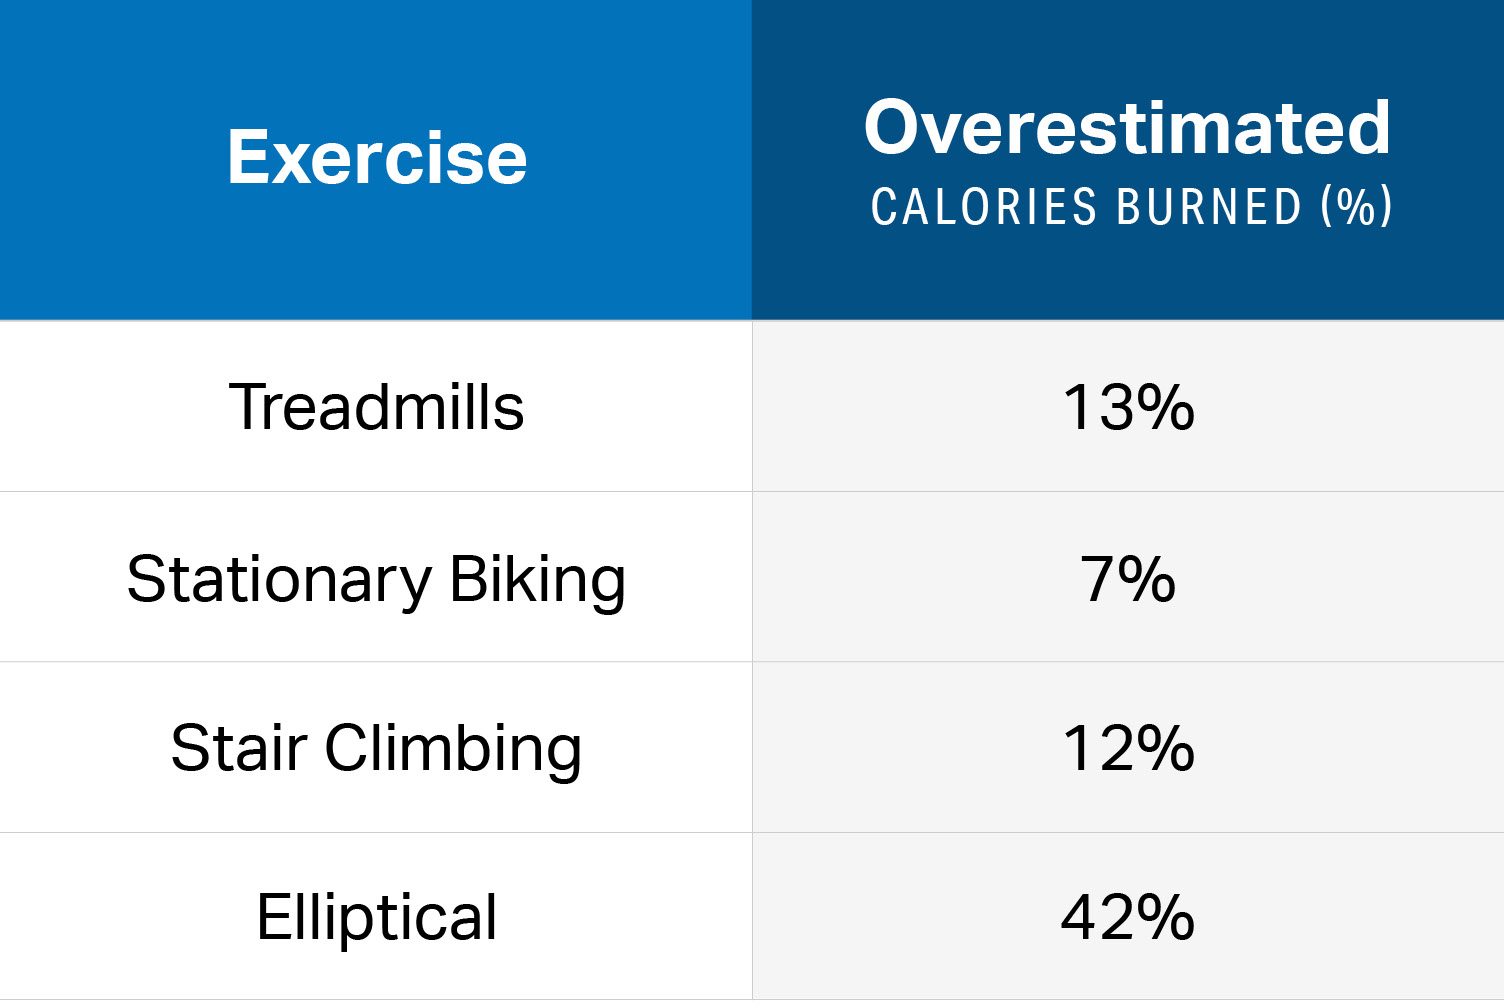 Calories Burned While Running Chart